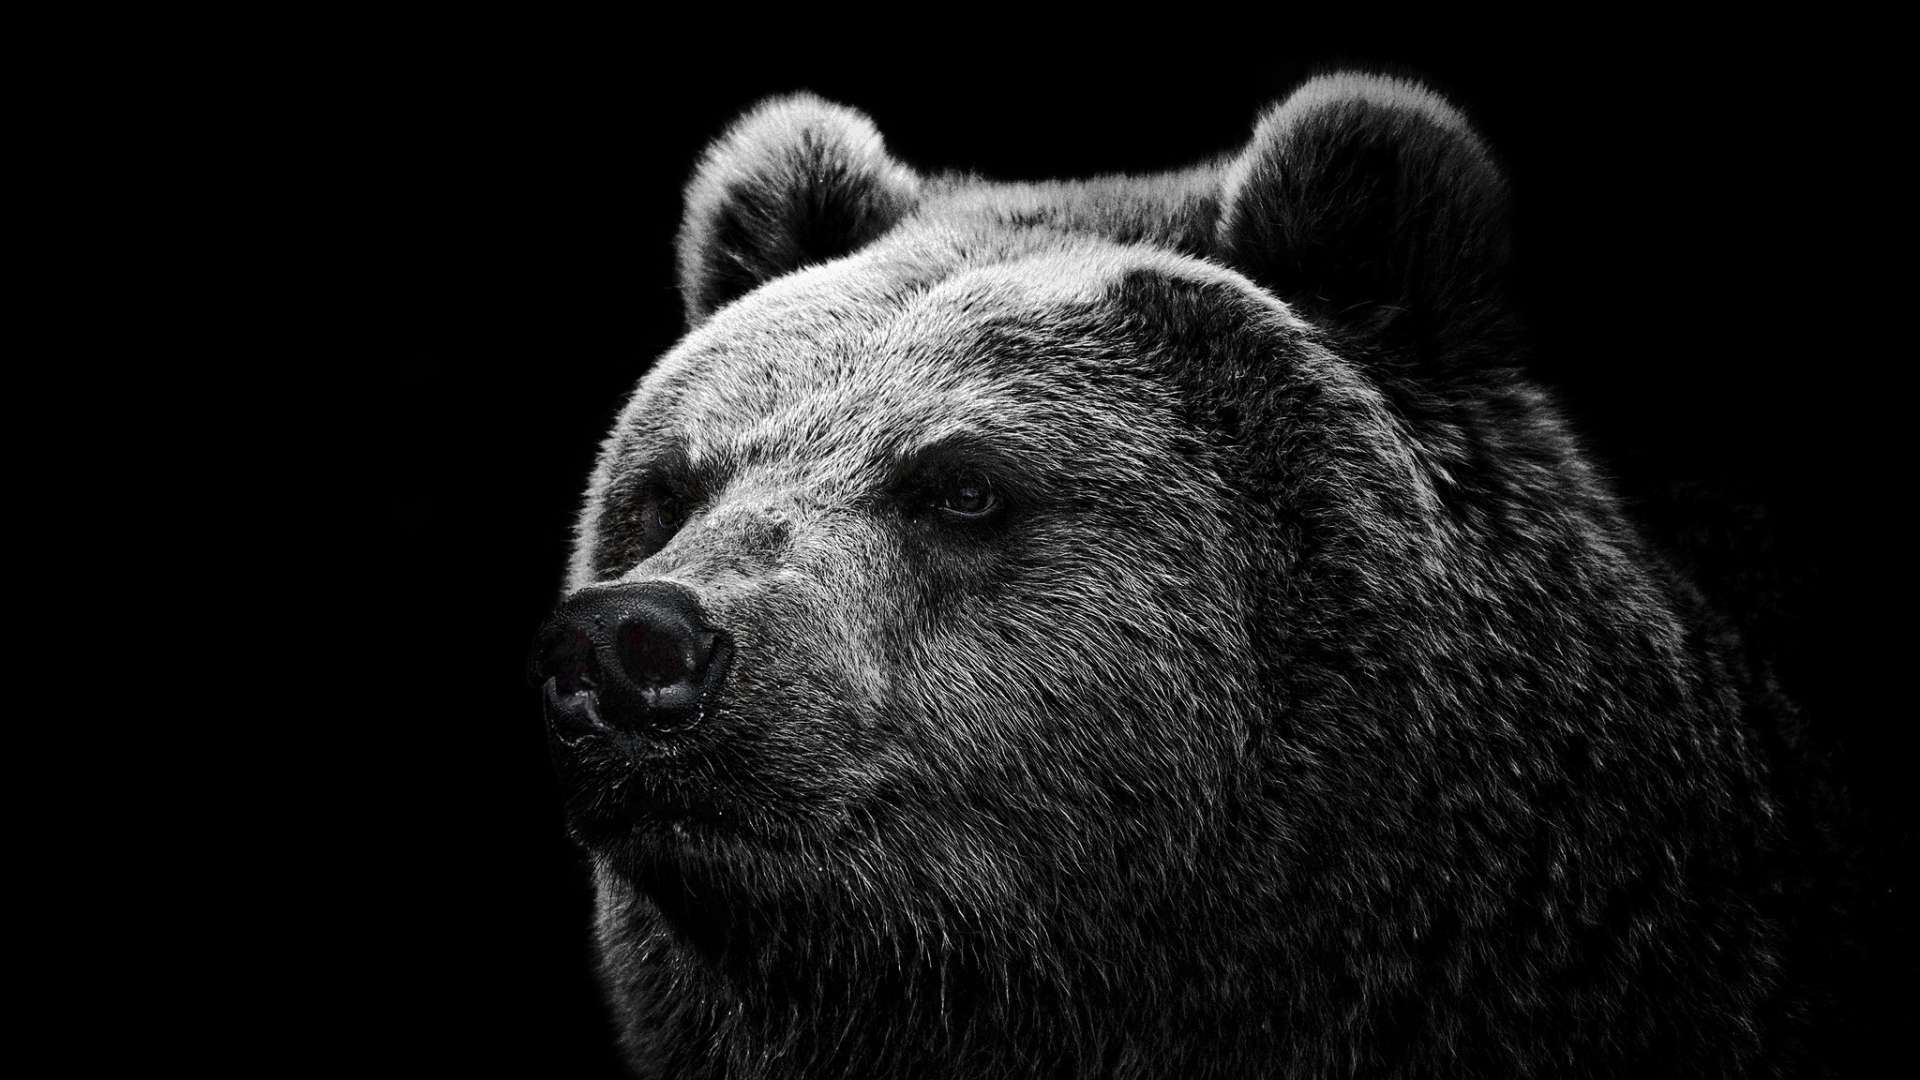 Wallpaper Grizzly Bear HD Upload At October By